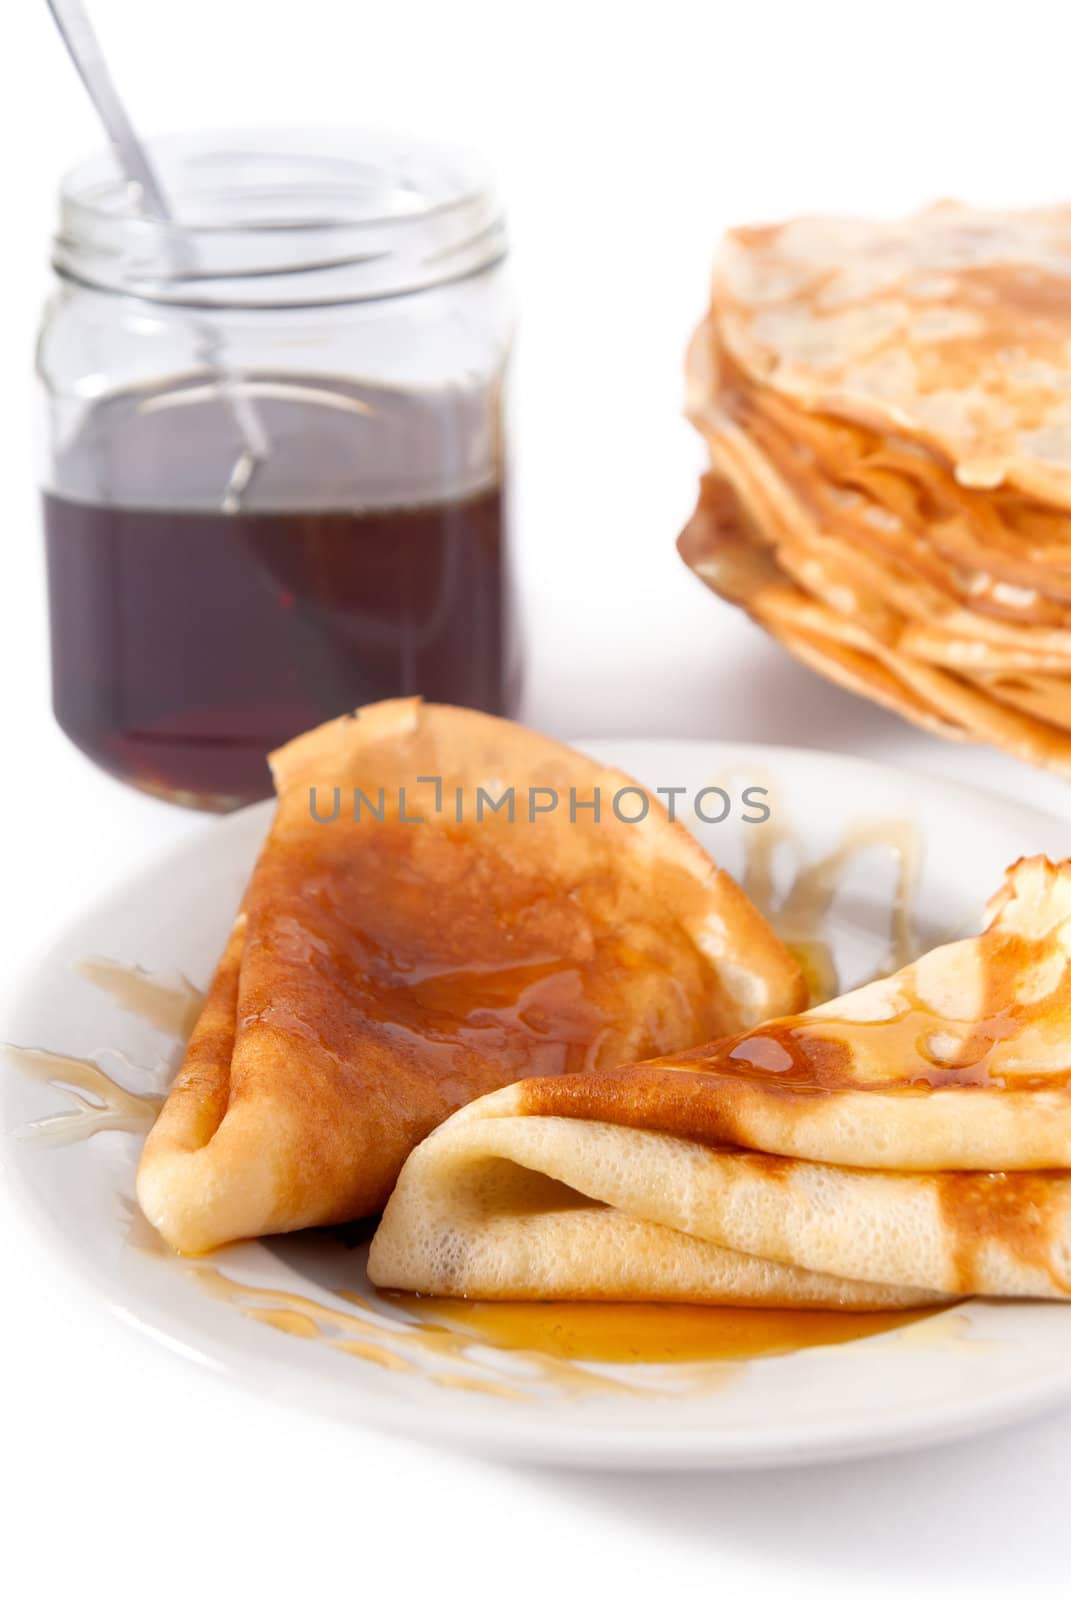 Russian pancake with honey on white